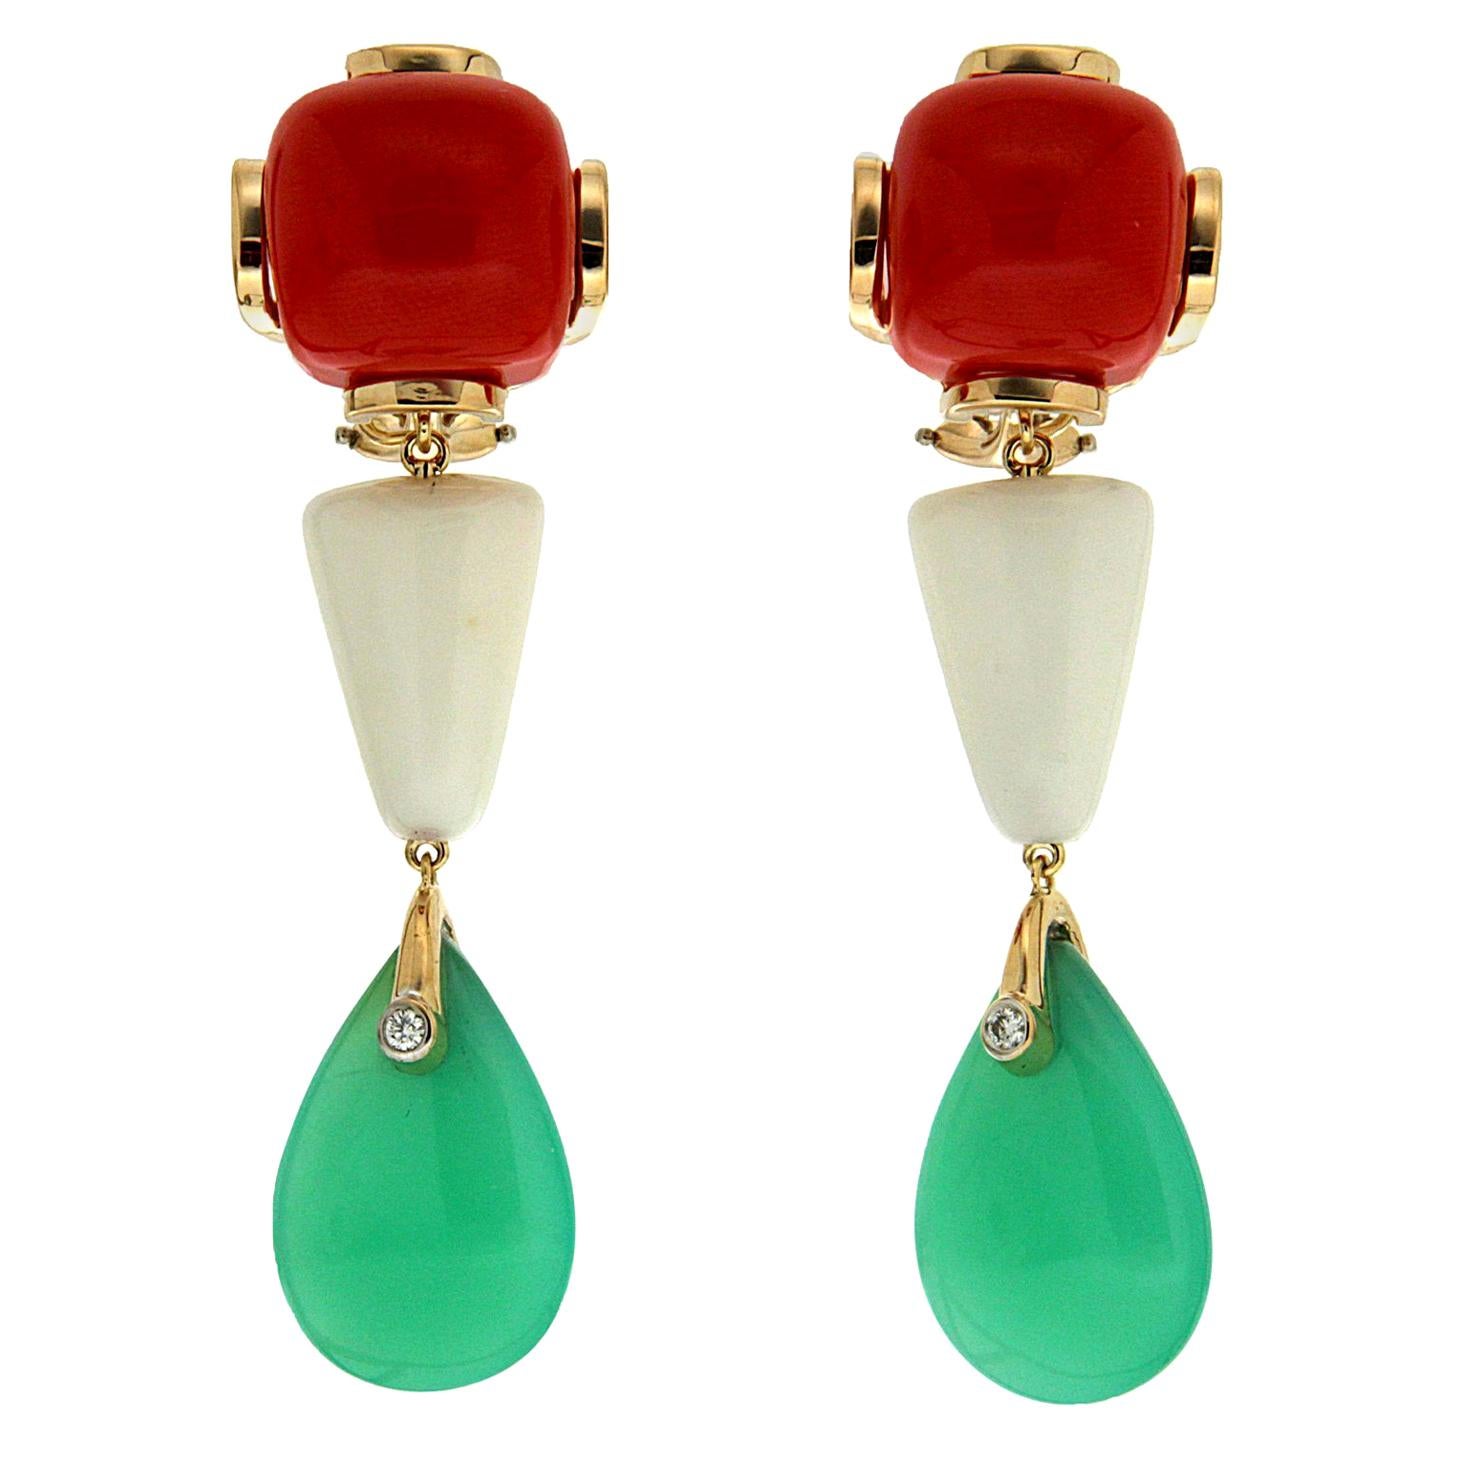 Valentin Magro Coral, White Trapezoid and Chrysoprase Gold Drop Earrings